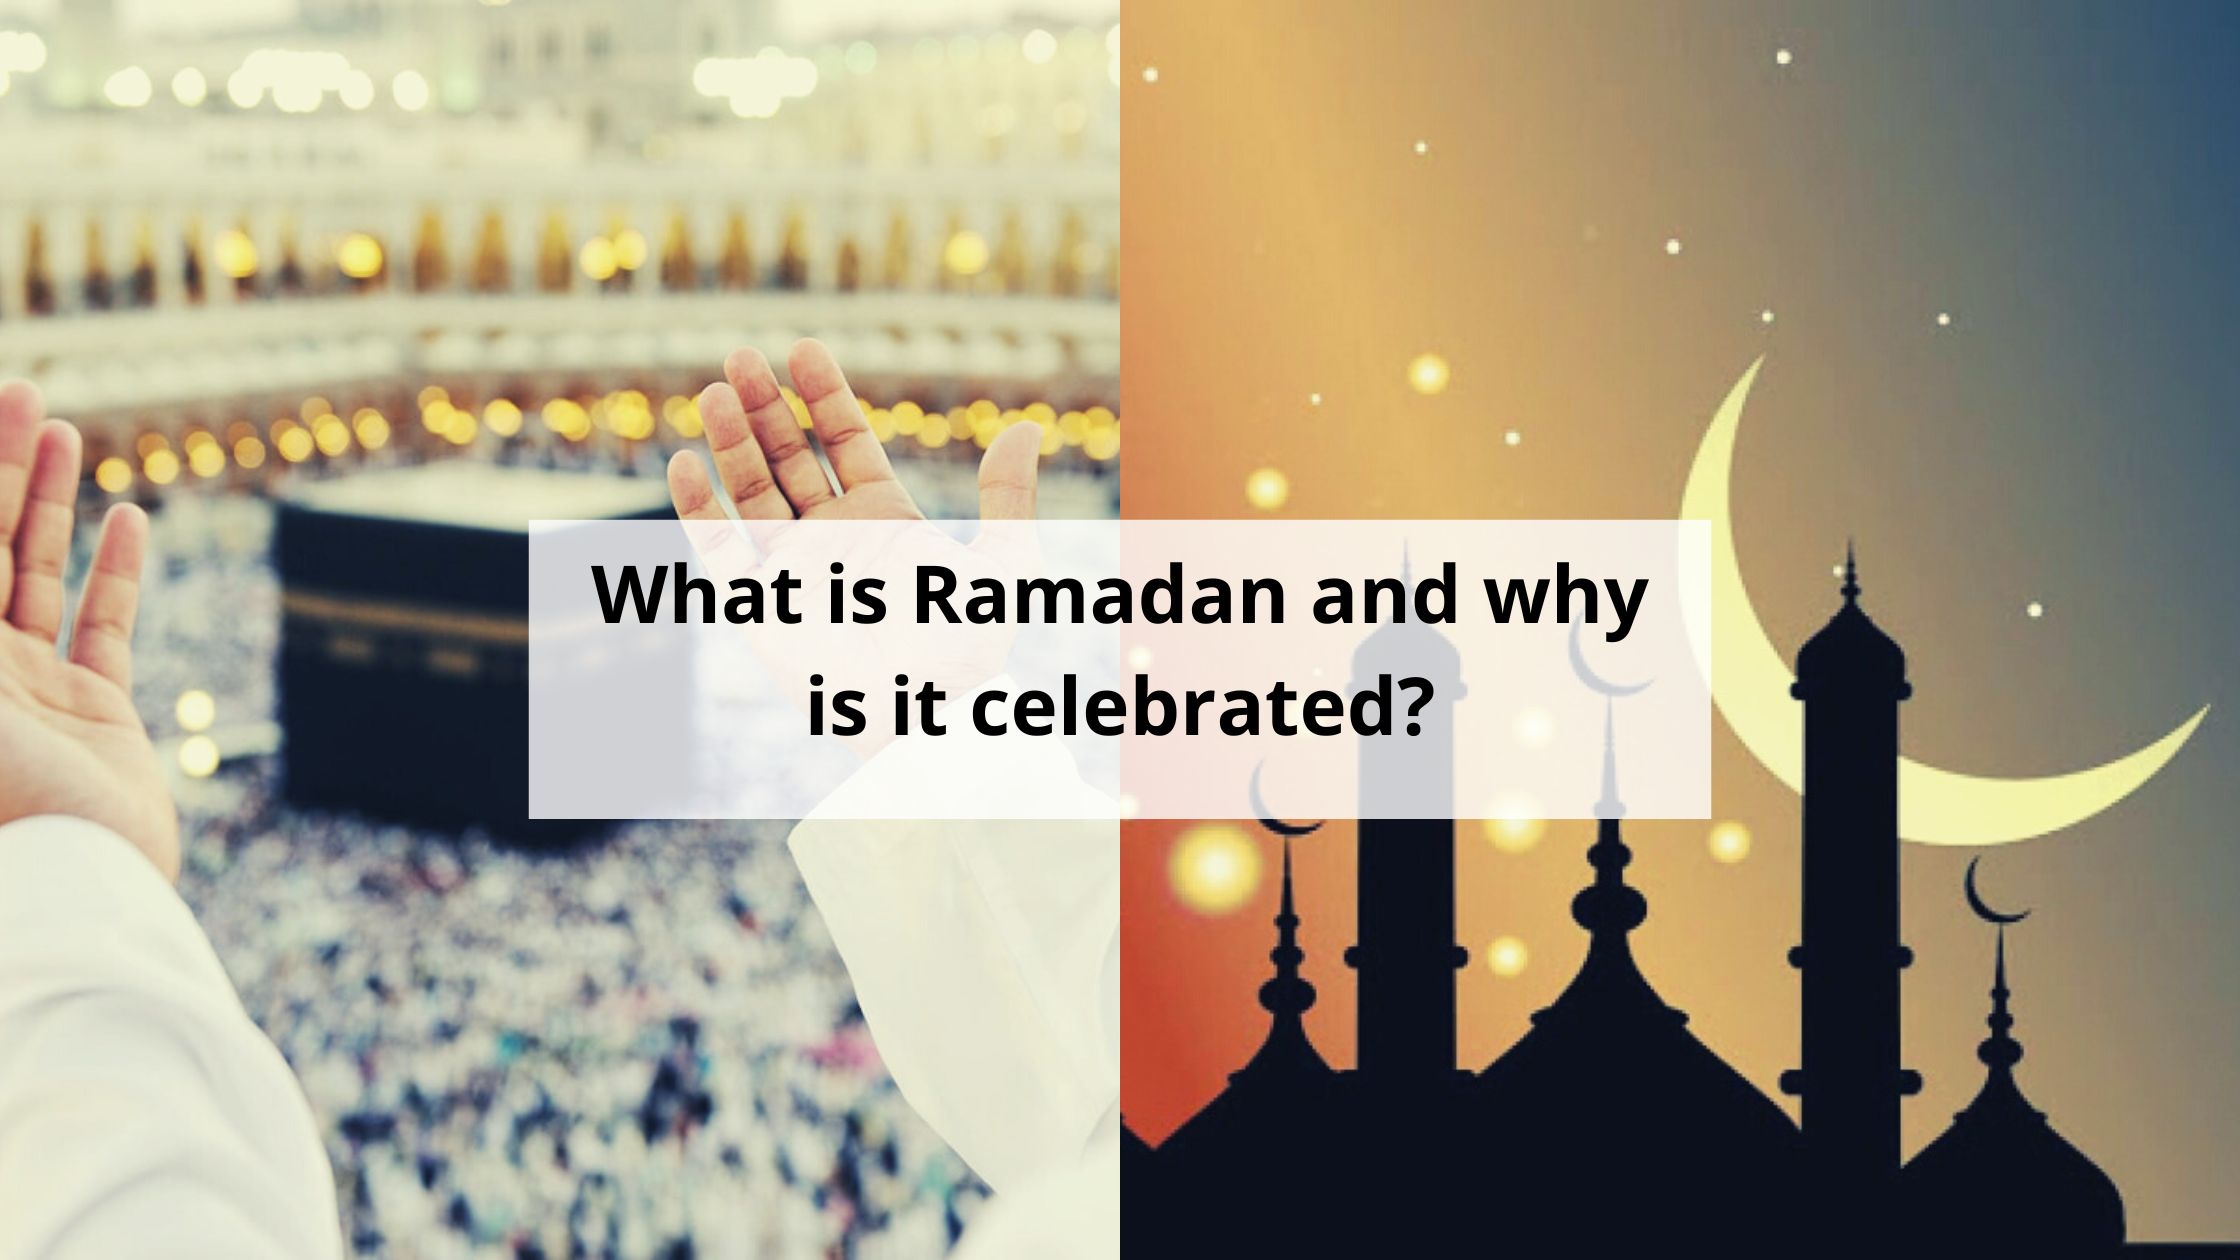 What is Ramadan and why is it celebrated